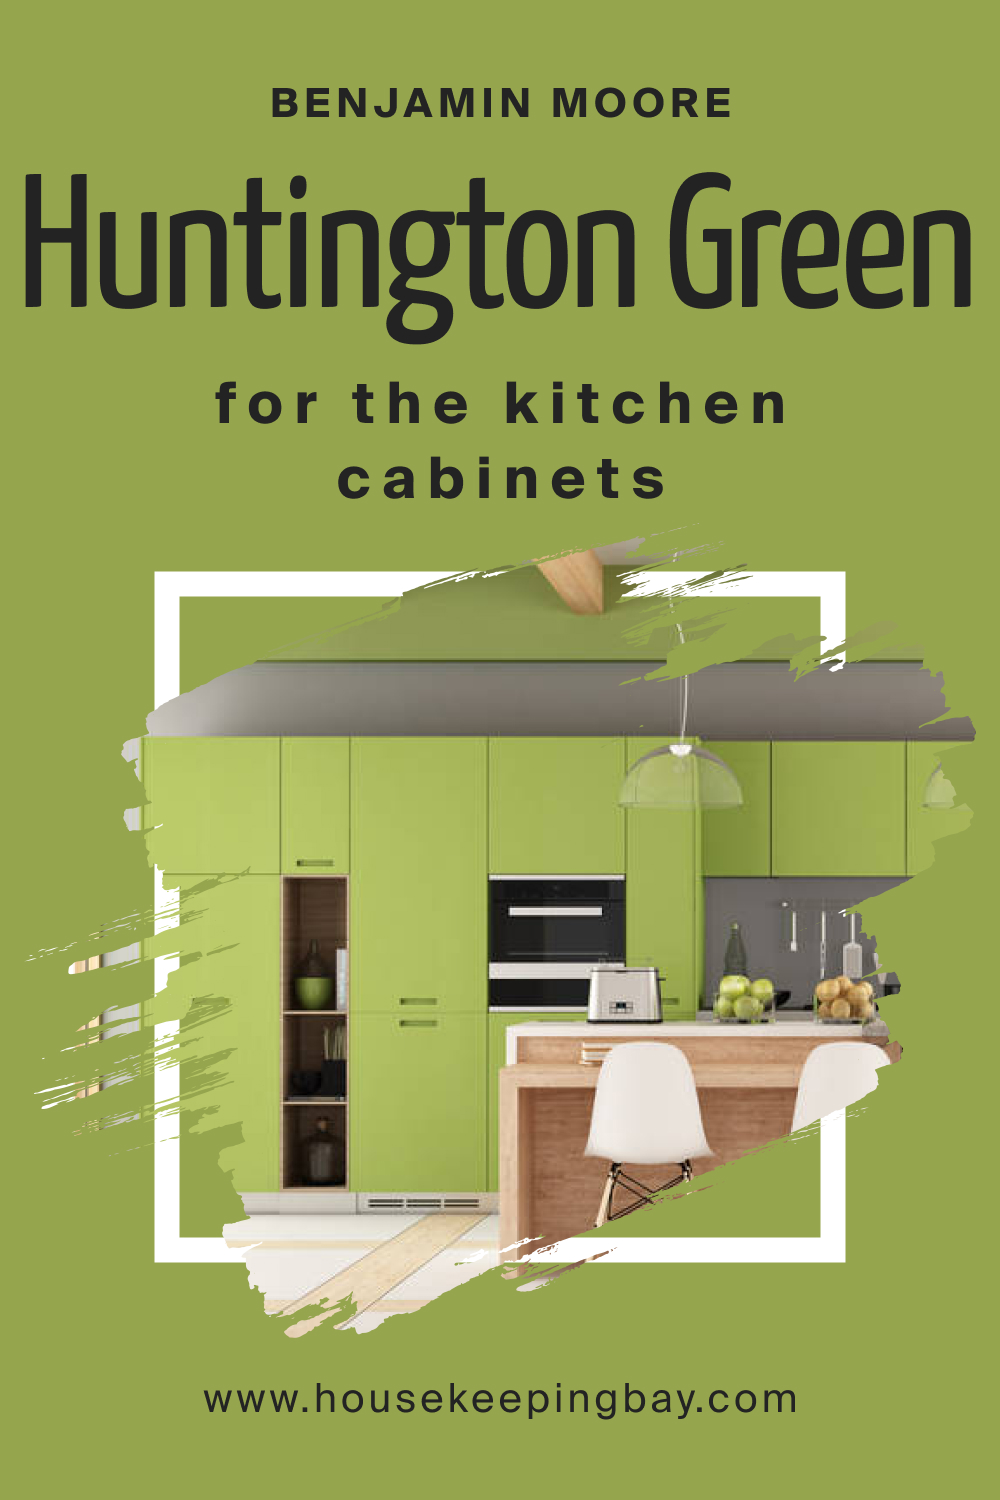 How to Use Huntington Green 406 on the Kitchen Cabinets?